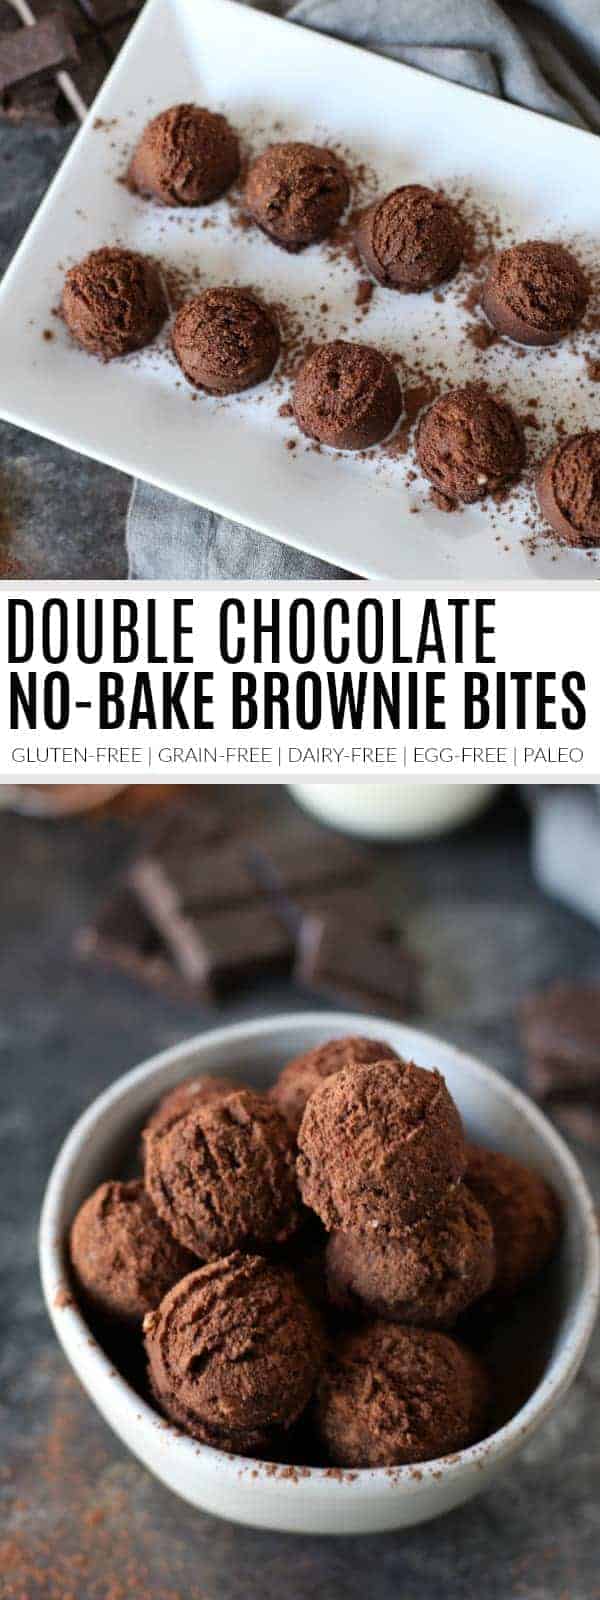 pinterest image for double chocolate no-bake brownie bites